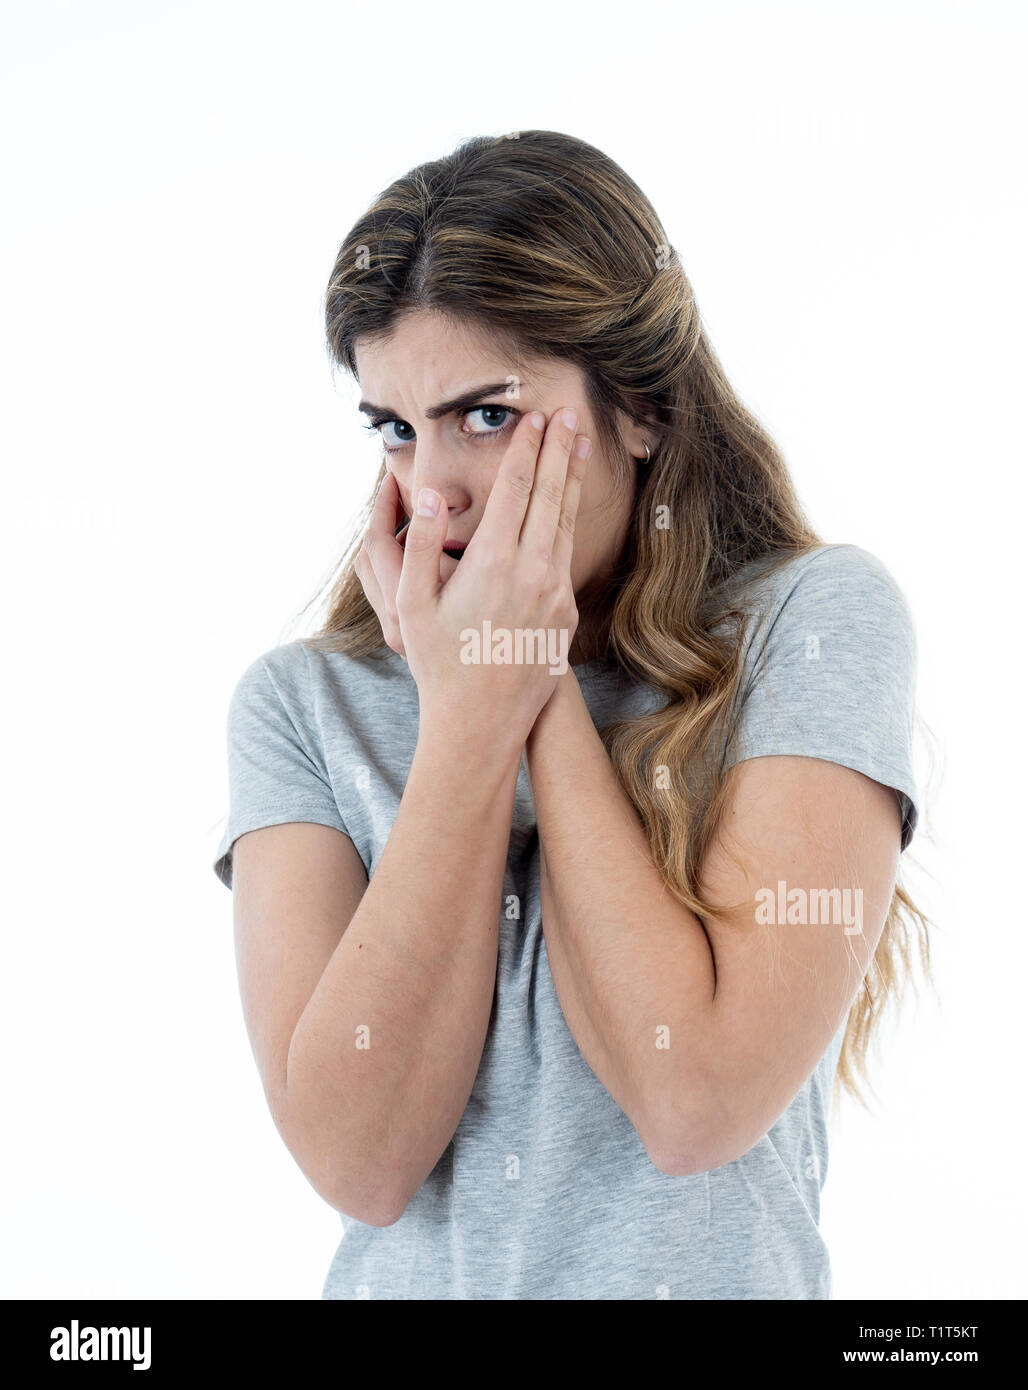 Close up portrait of young woman feeling afraid and shocked hiding her face from something scary. Looking with fear in her eyes. People and Human expr Stock Photo